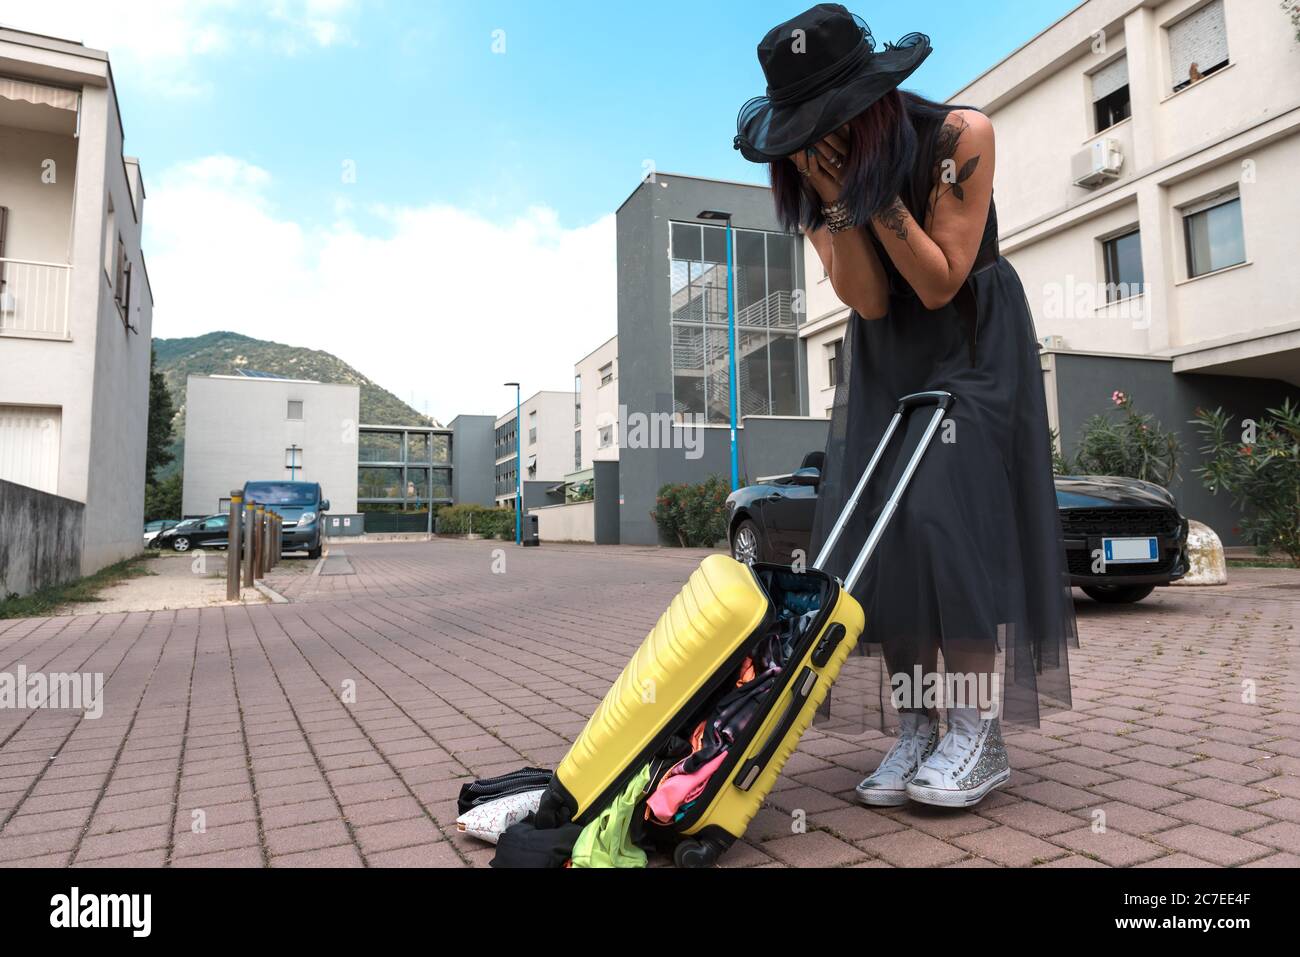 The angry woman trying to close the suitcase that suddenly opened on the road. Stock Photo